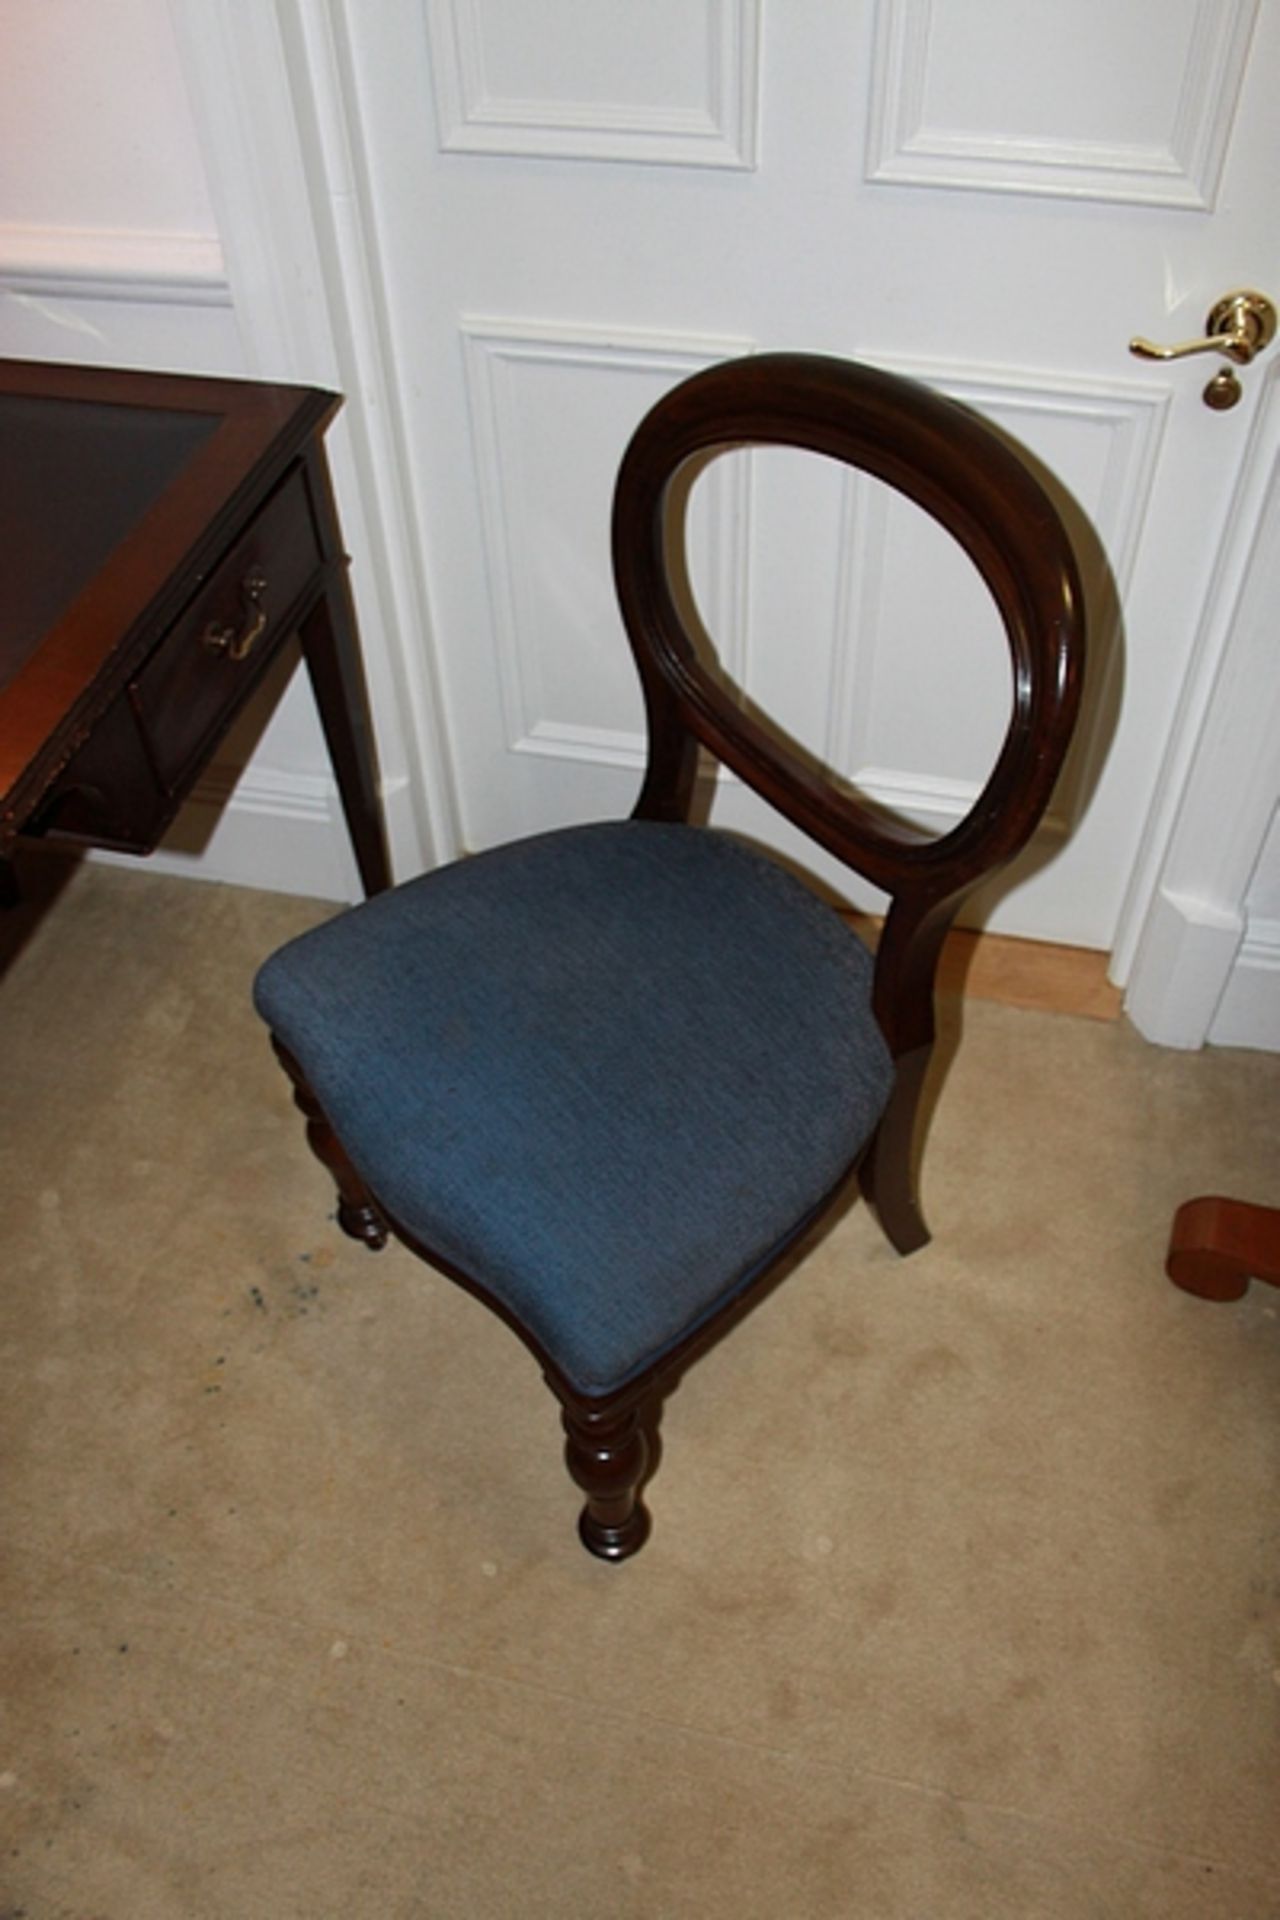 A mahogany round back Georgian style side chair with blue seat pad